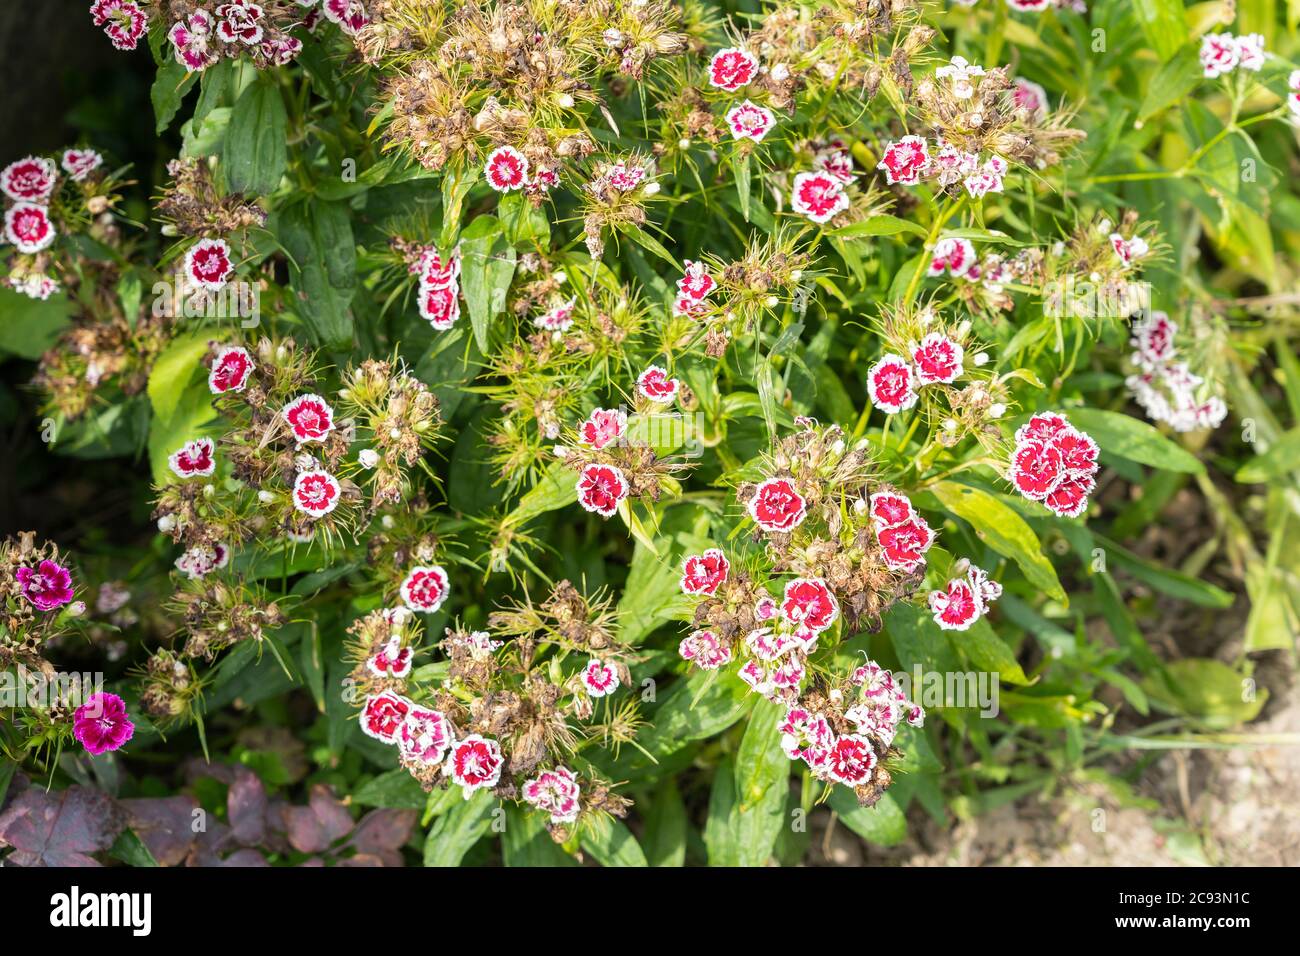 Dianthus barbatus, the sweet William, with pink and white variegated flowers, growing in a garden in Austria. Stock Photo